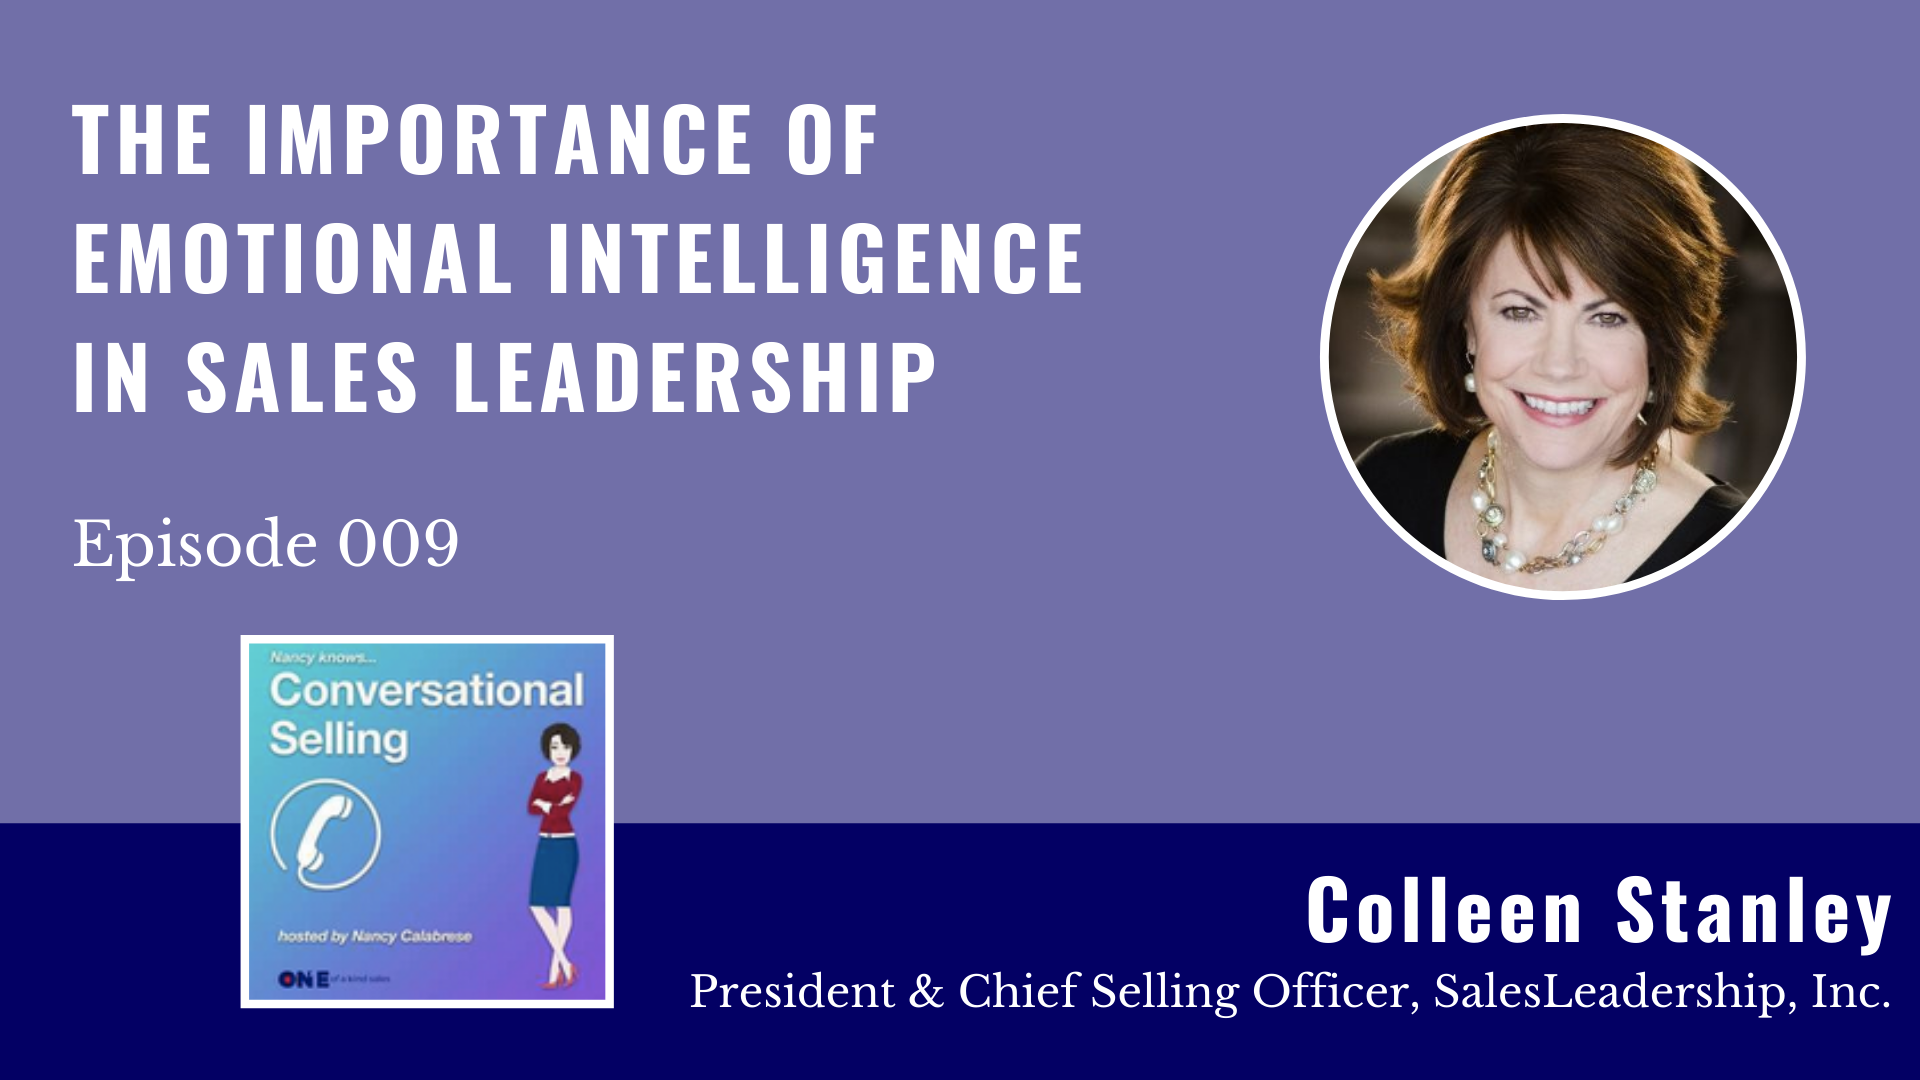 Colleen Stanley | The Importance of Emotional Intelligence in Sales Leadership